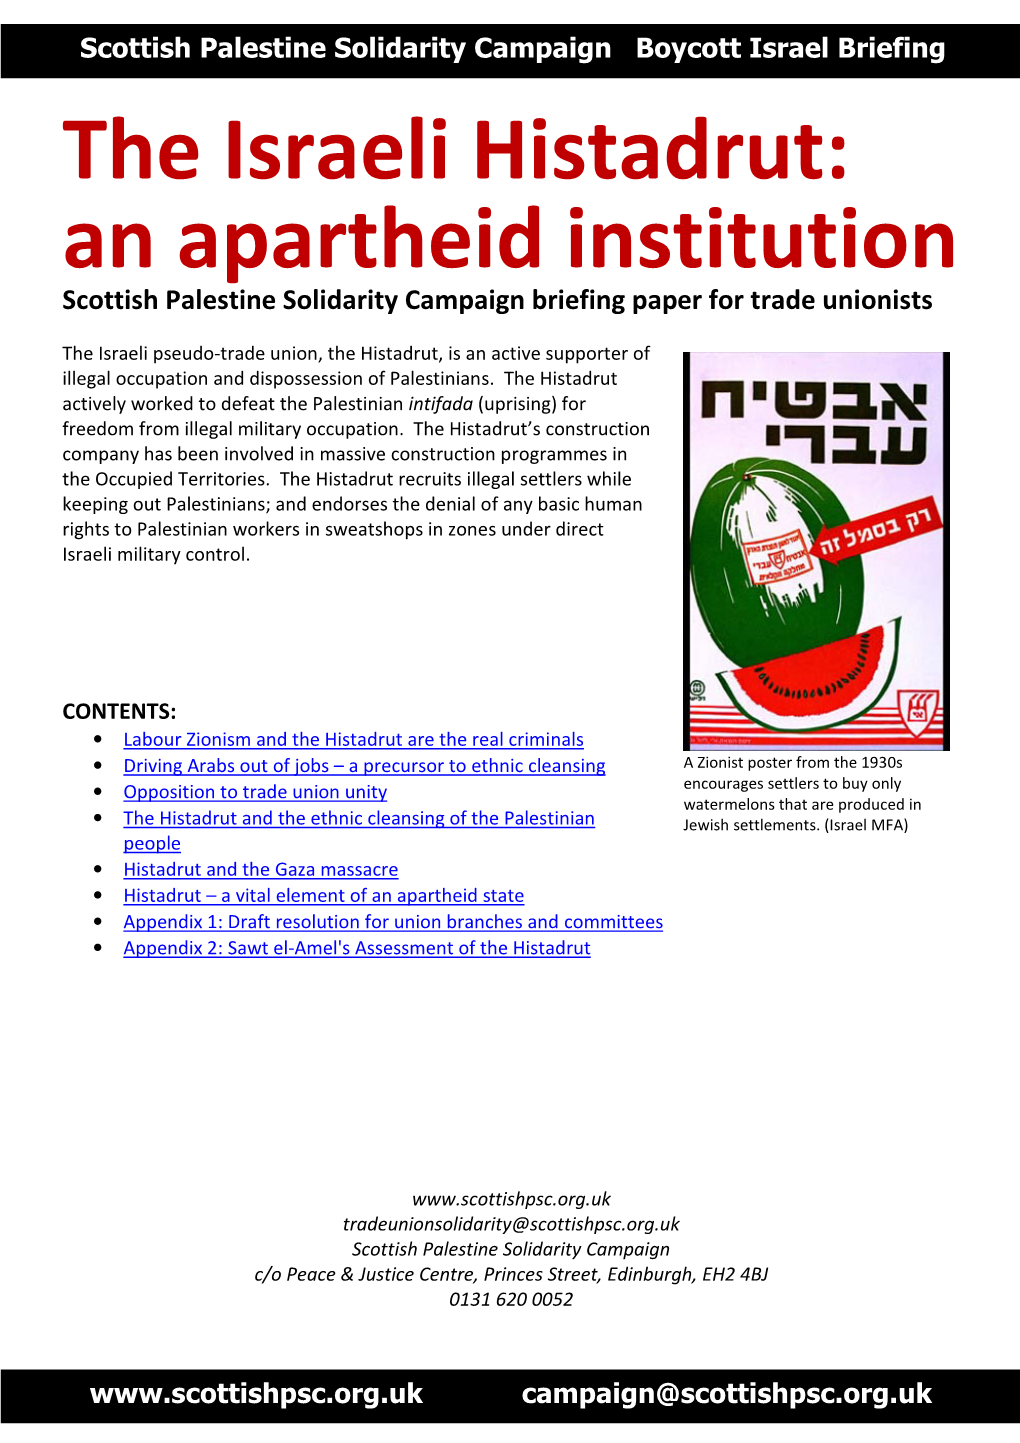 The Israeli Histadrut: an Apartheid Institution Scottish Palestine Solidarity Campaign Briefing Paper for Trade Unionists